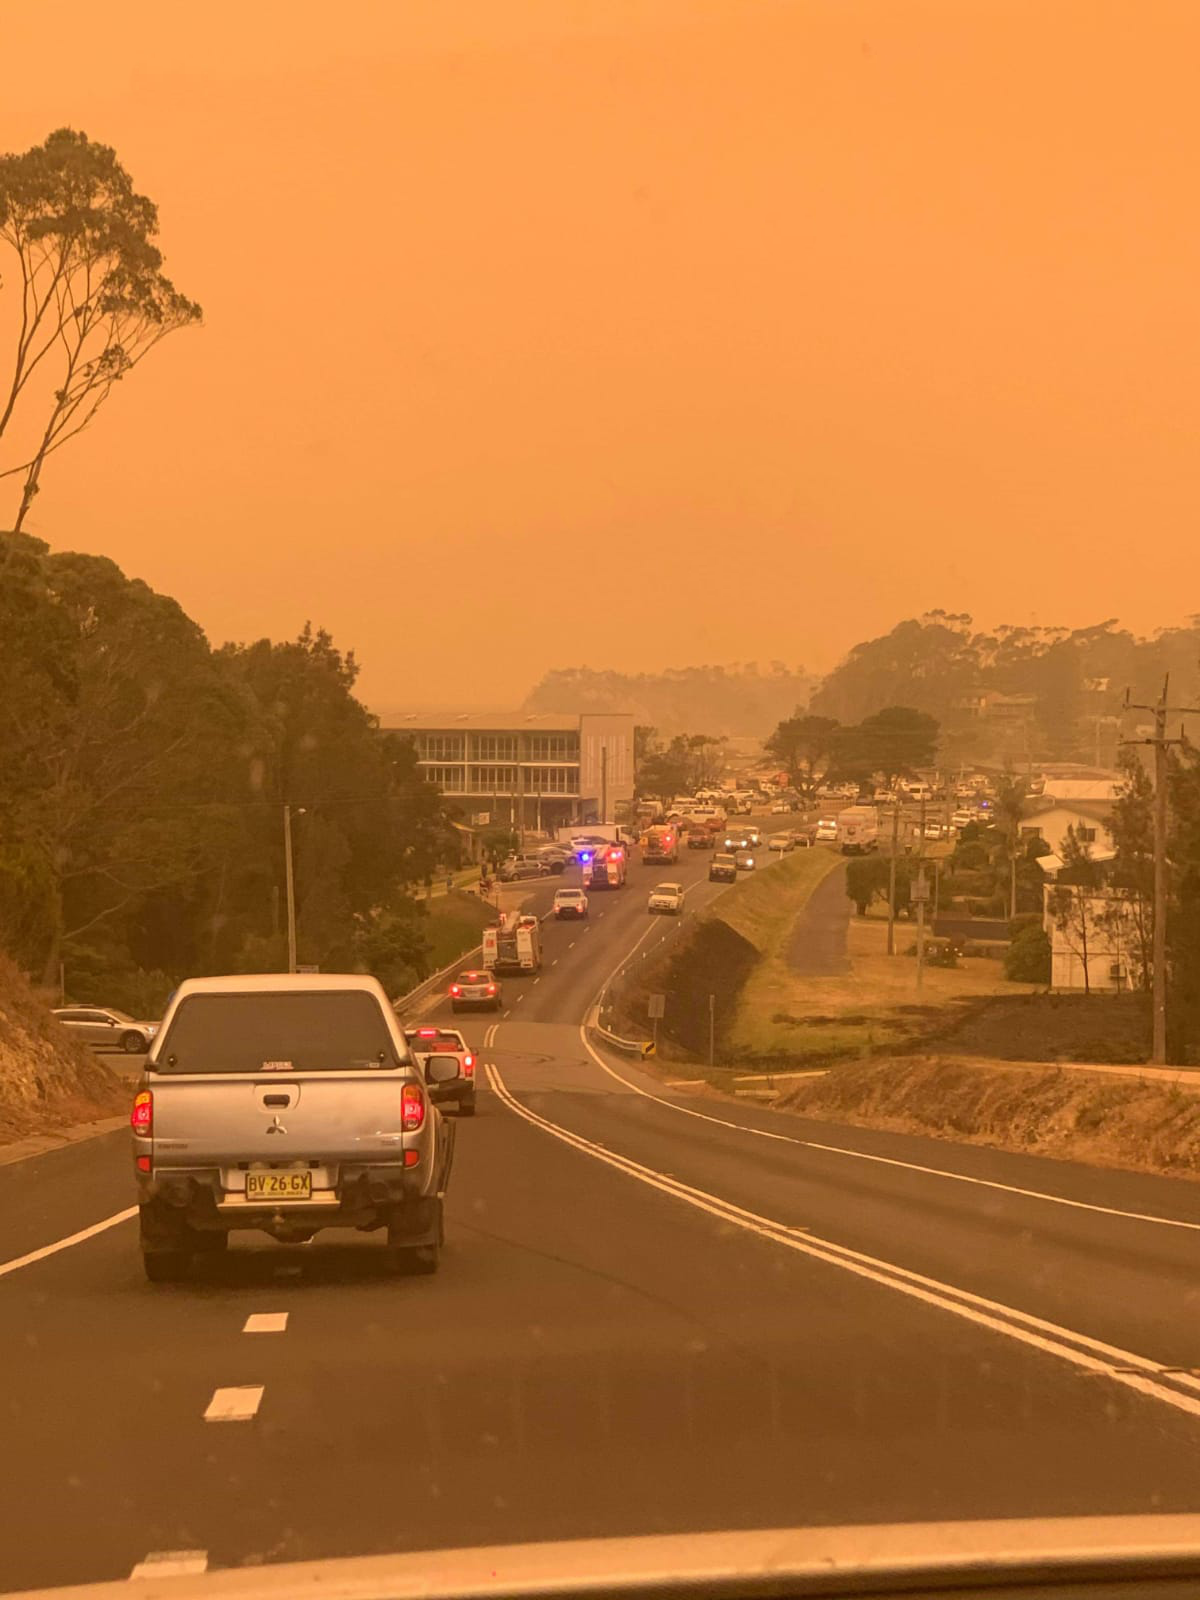 Malua Bay fire fighters rush to the wildfire © Melinda Varcoe